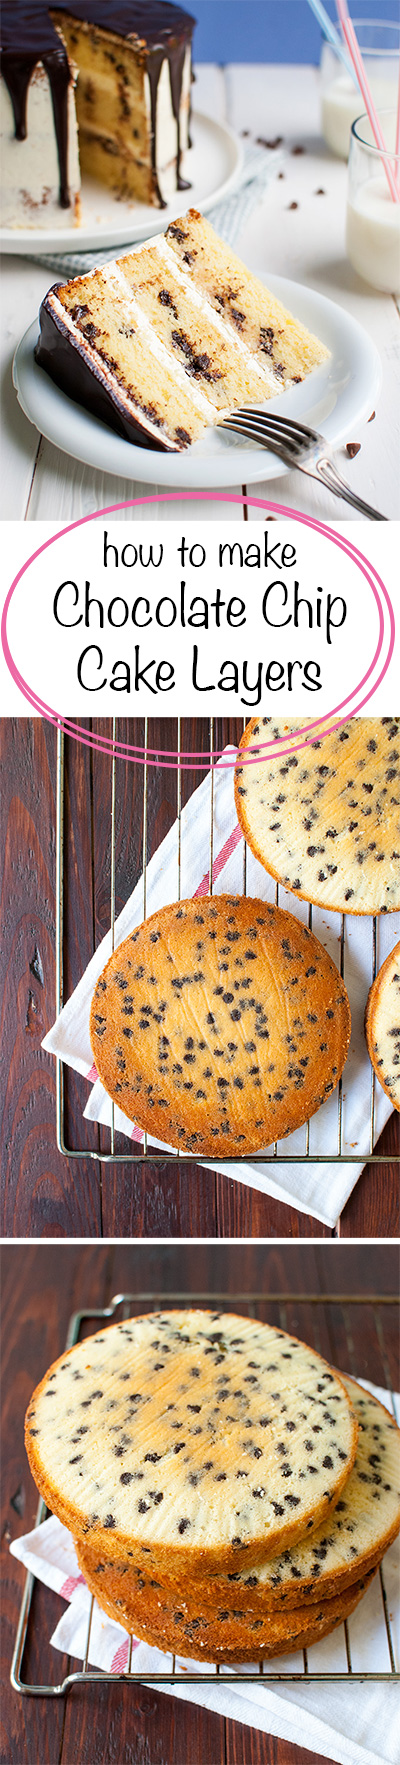 How to Make Chocolate Chip Cake Layers - these chocolate chip cake layers are thick, fluffy and DELICIOUS! Perfect with simple, homemade chocolate or vanilla frosting | thetoughcookie.com